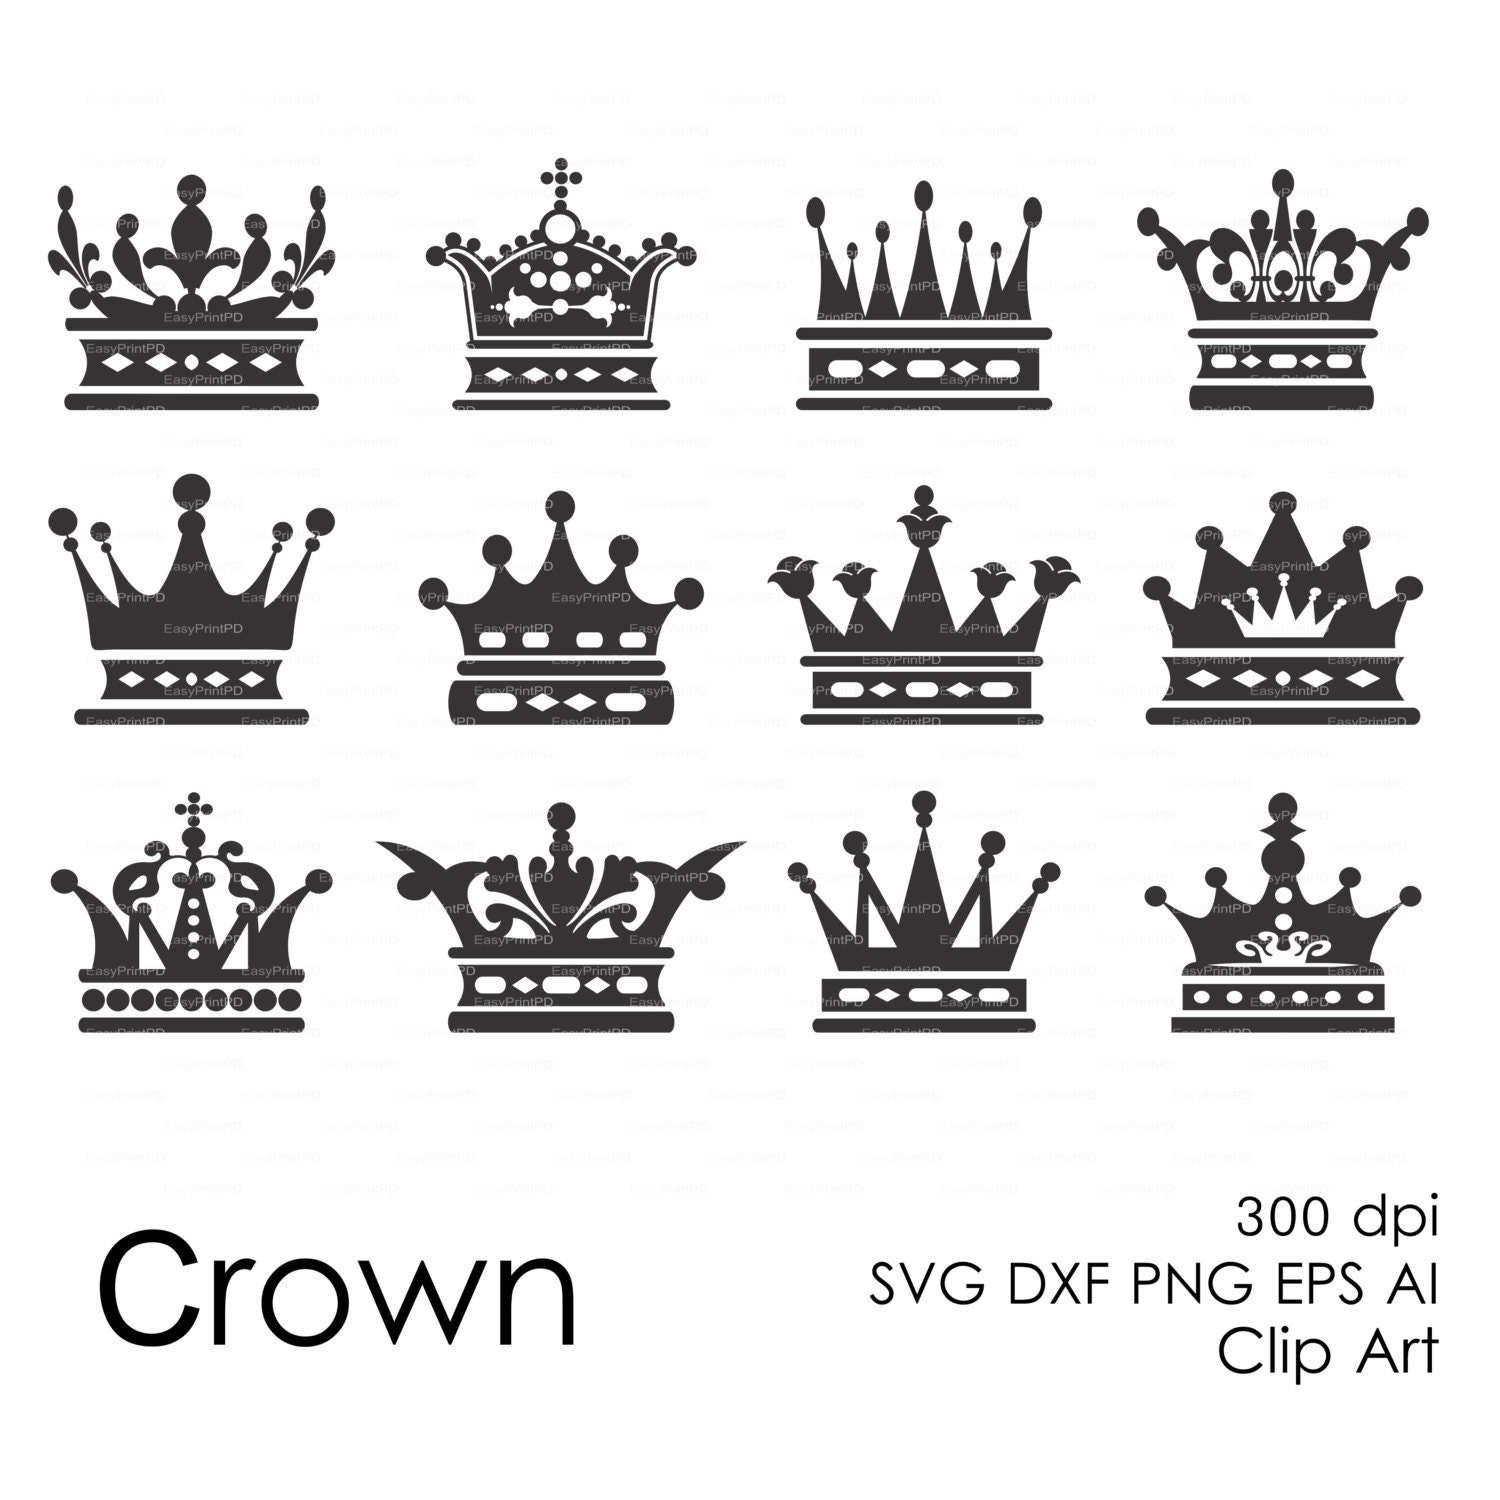 Download Royal Crowns Queen King Monarchy Silhouette eps svg dxf